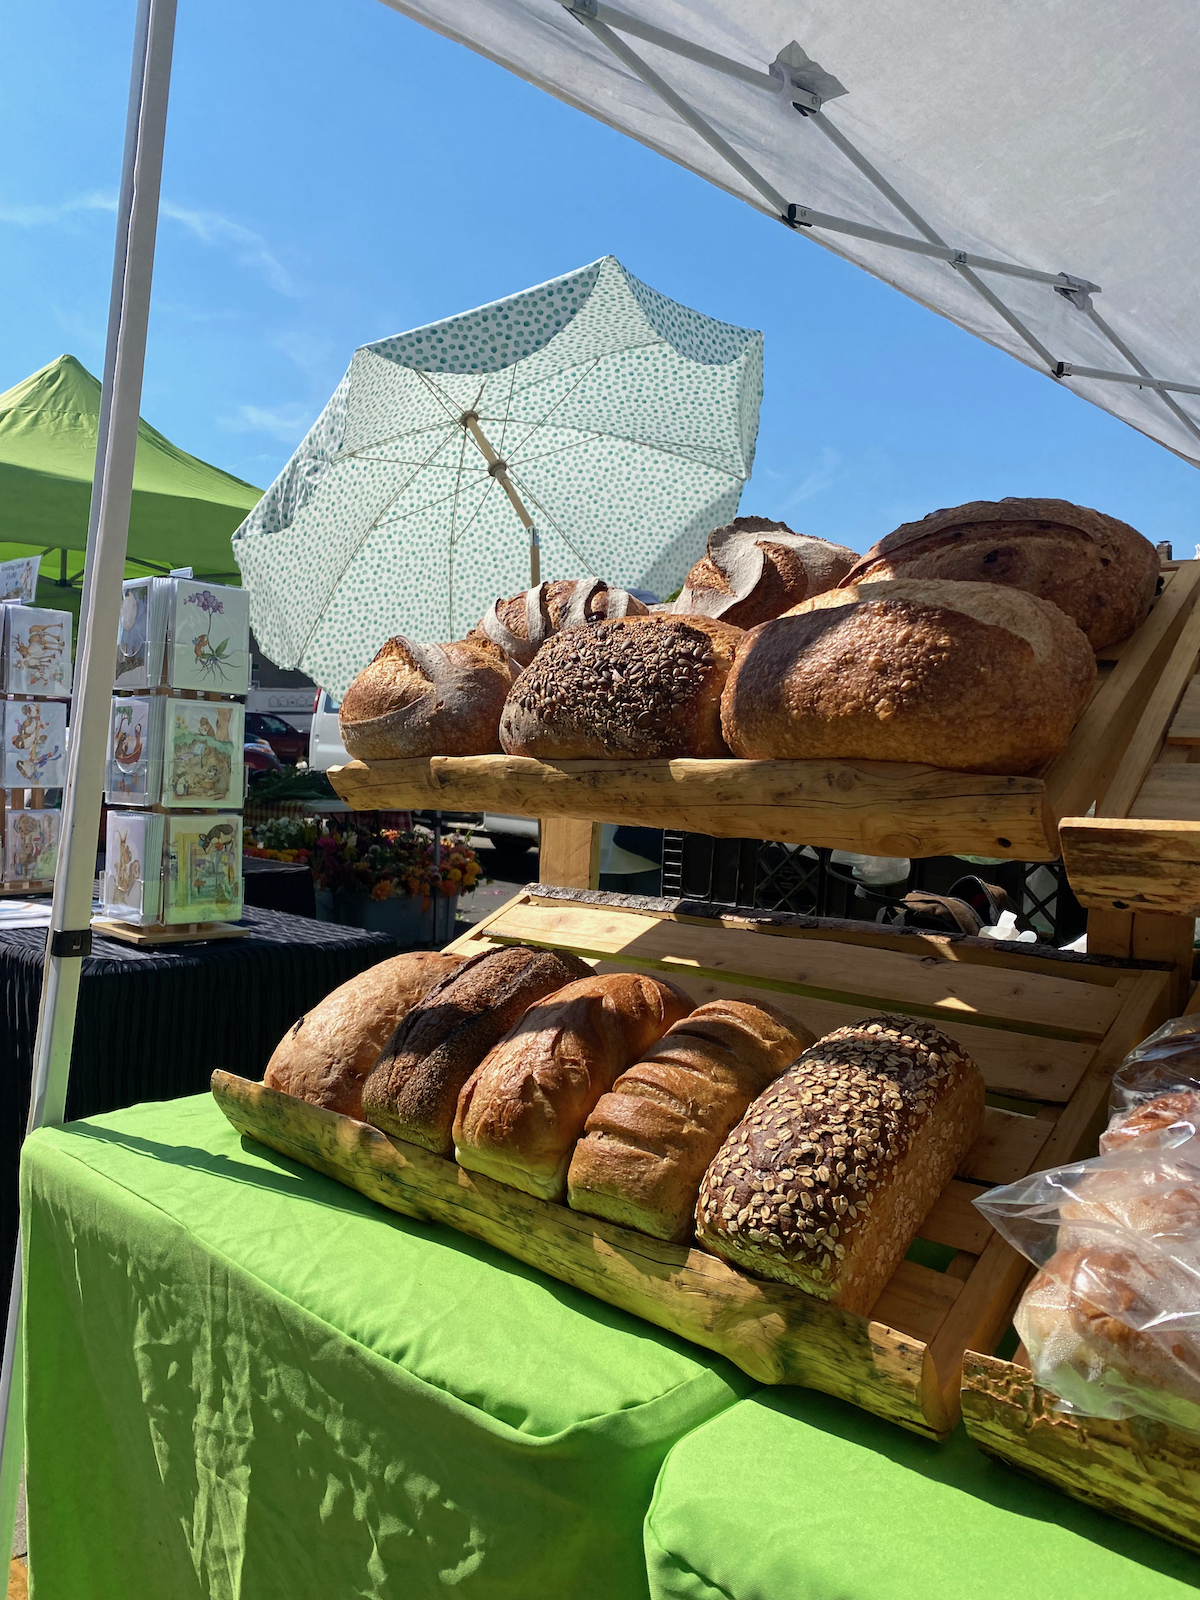 Display of bread at Janesville Farmers Market in Janesville, Wisconsin